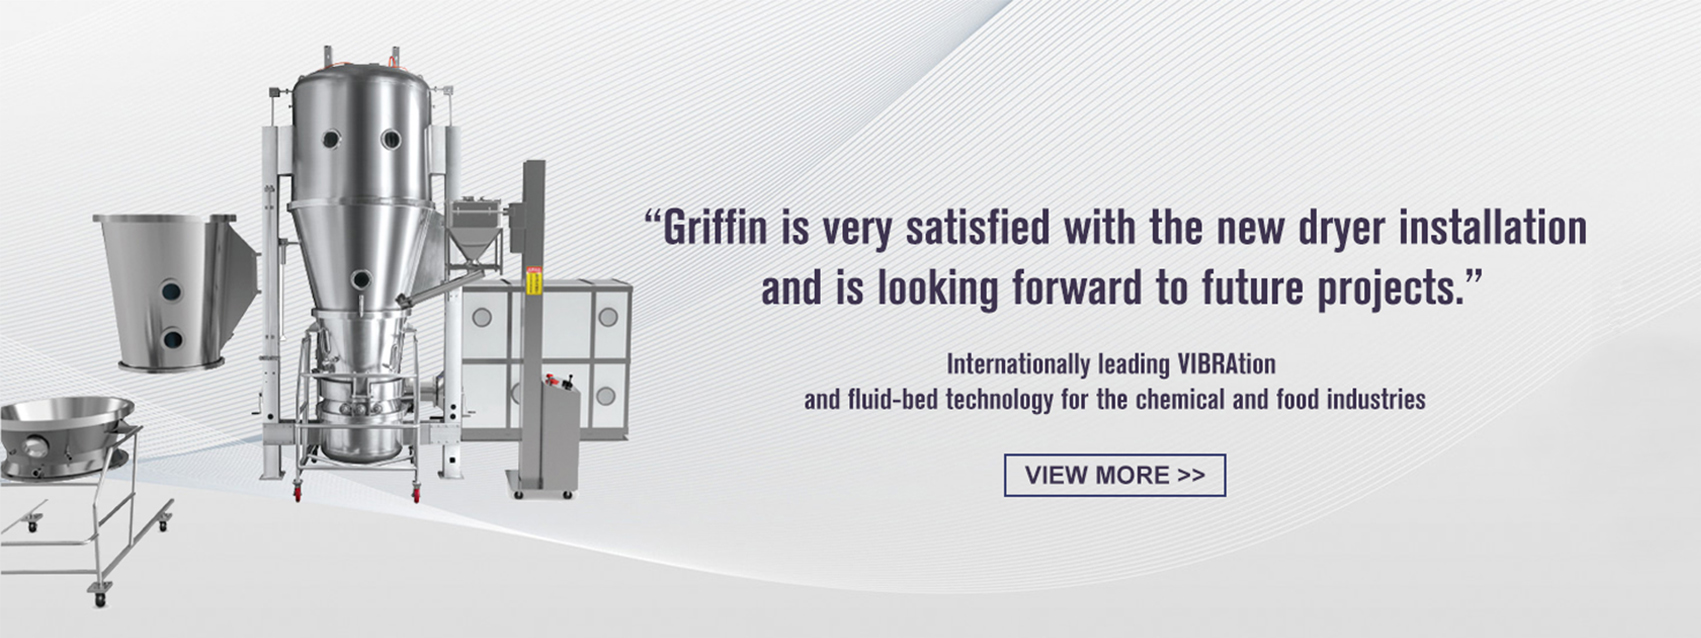 Griffin Technology Manufacturing Co., Ltd.